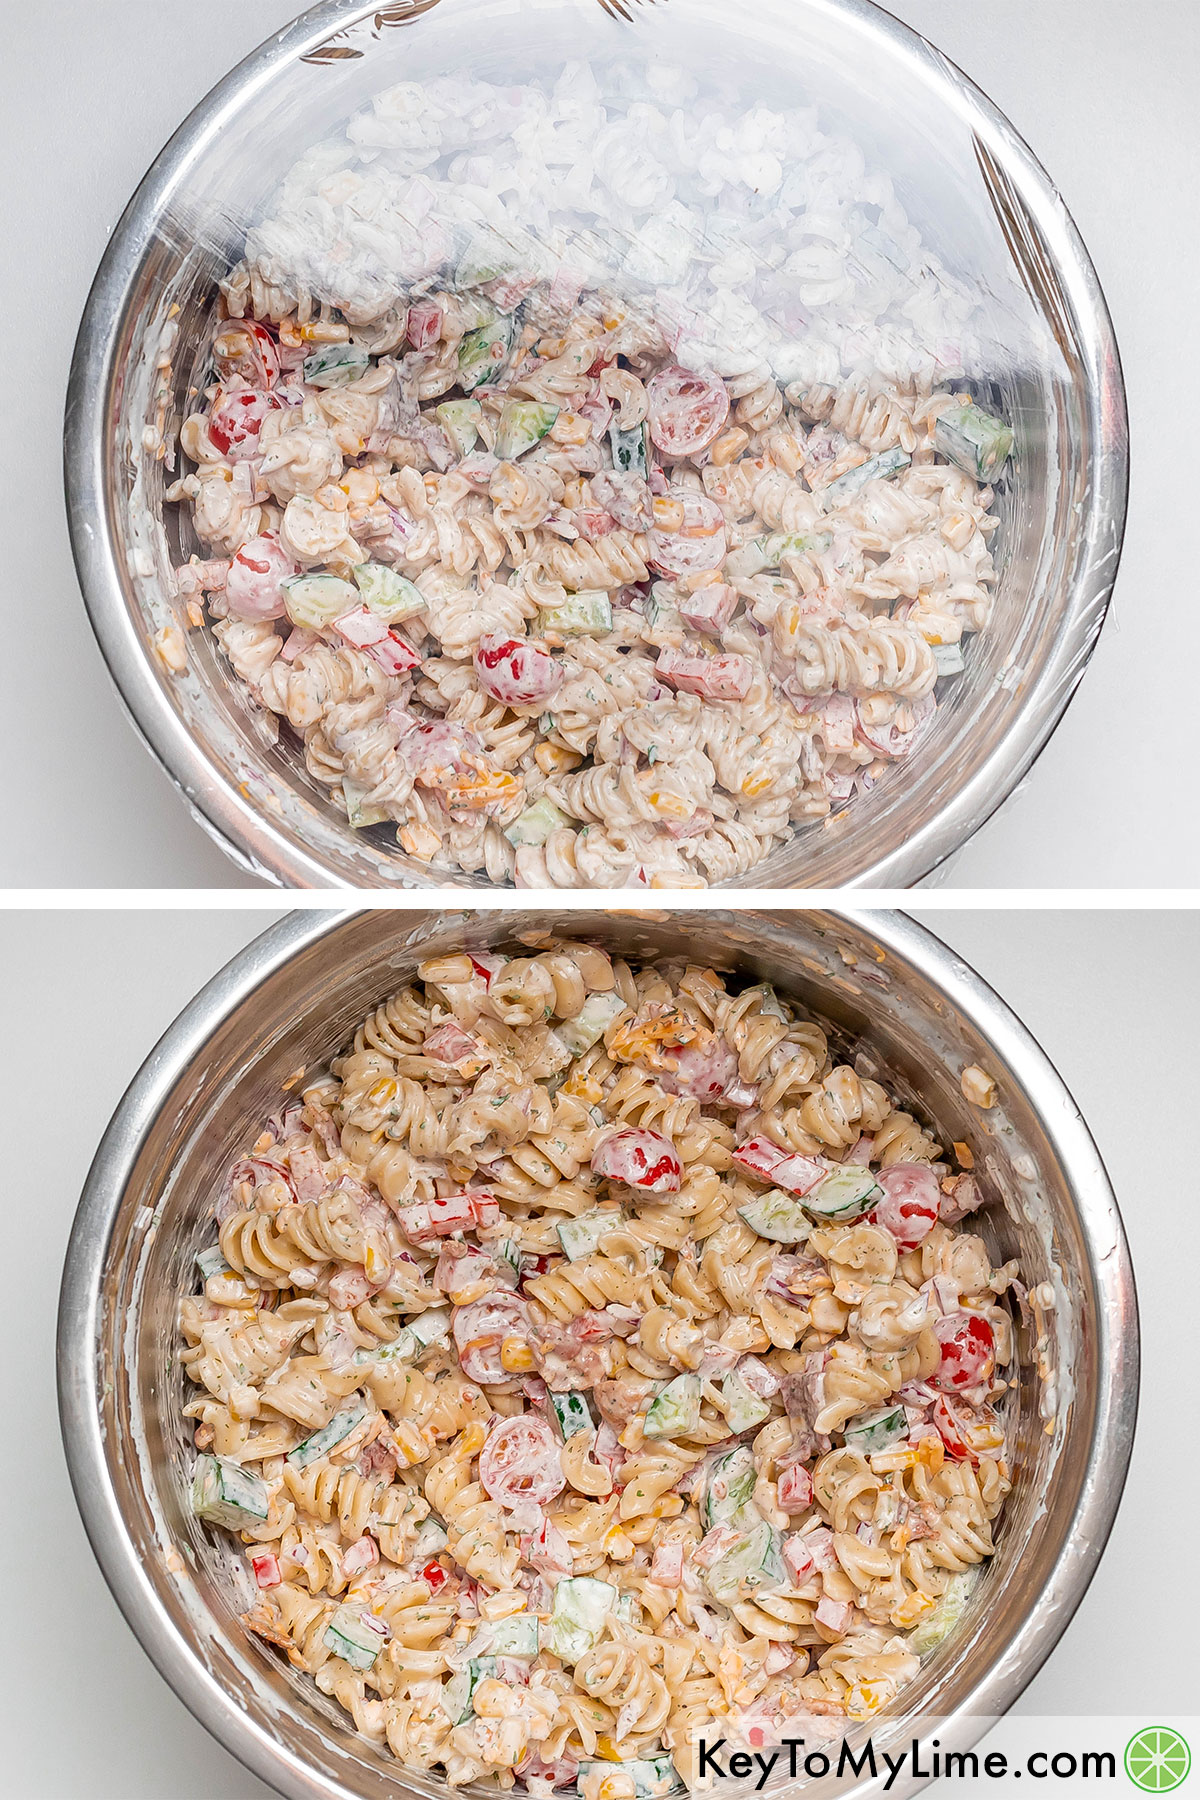 Covering and refrigerating the mixed pasta salad with saran wrap.